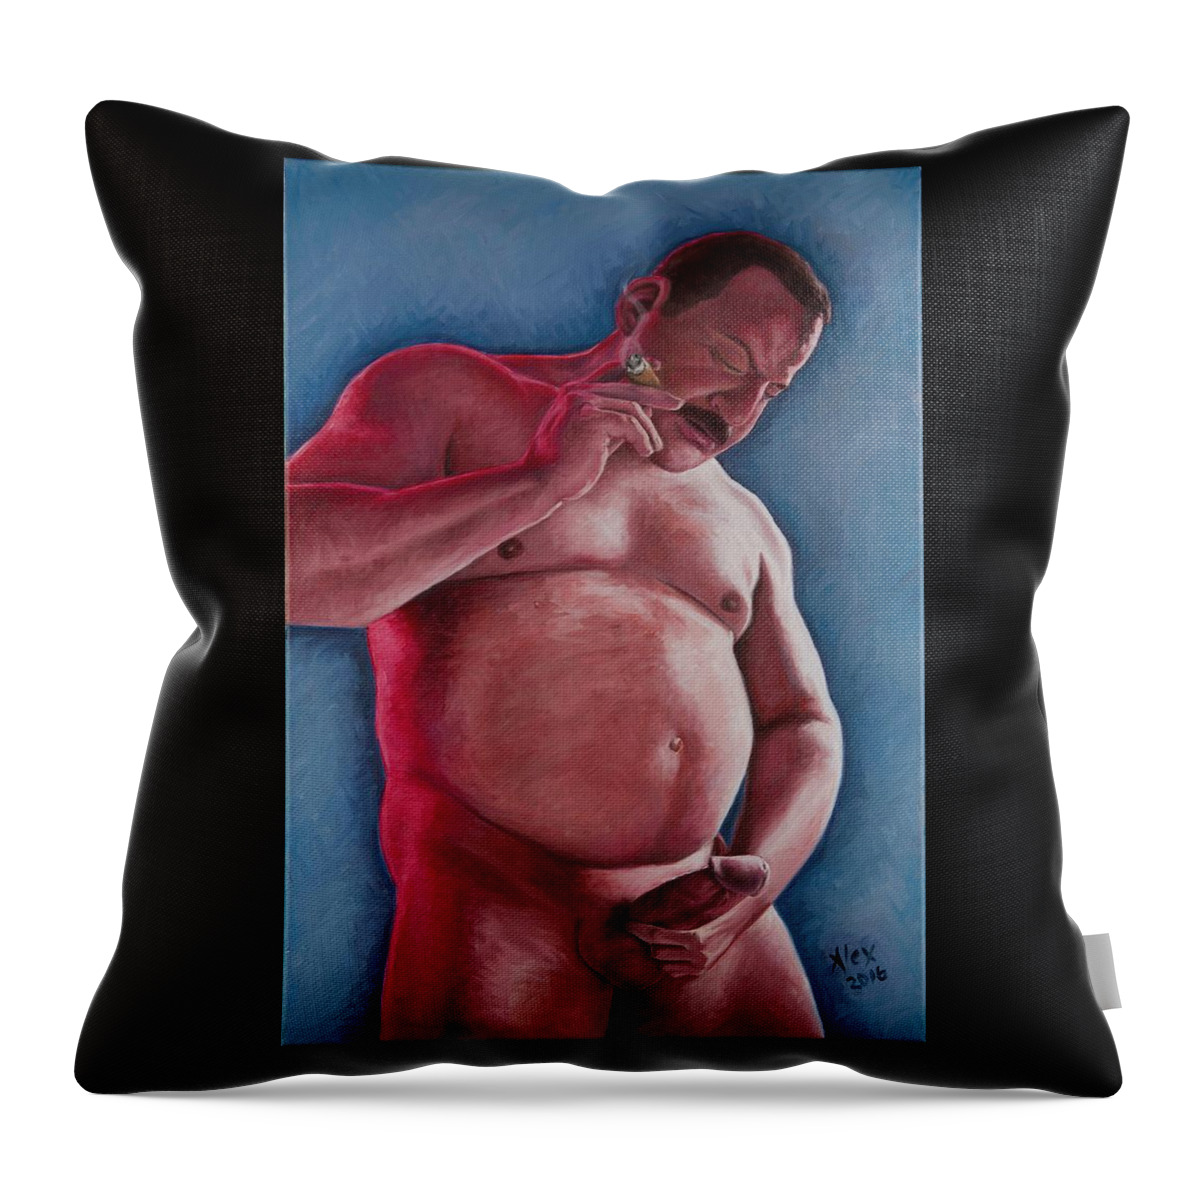 Erotic Throw Pillow featuring the painting Cigar by Alex Abel